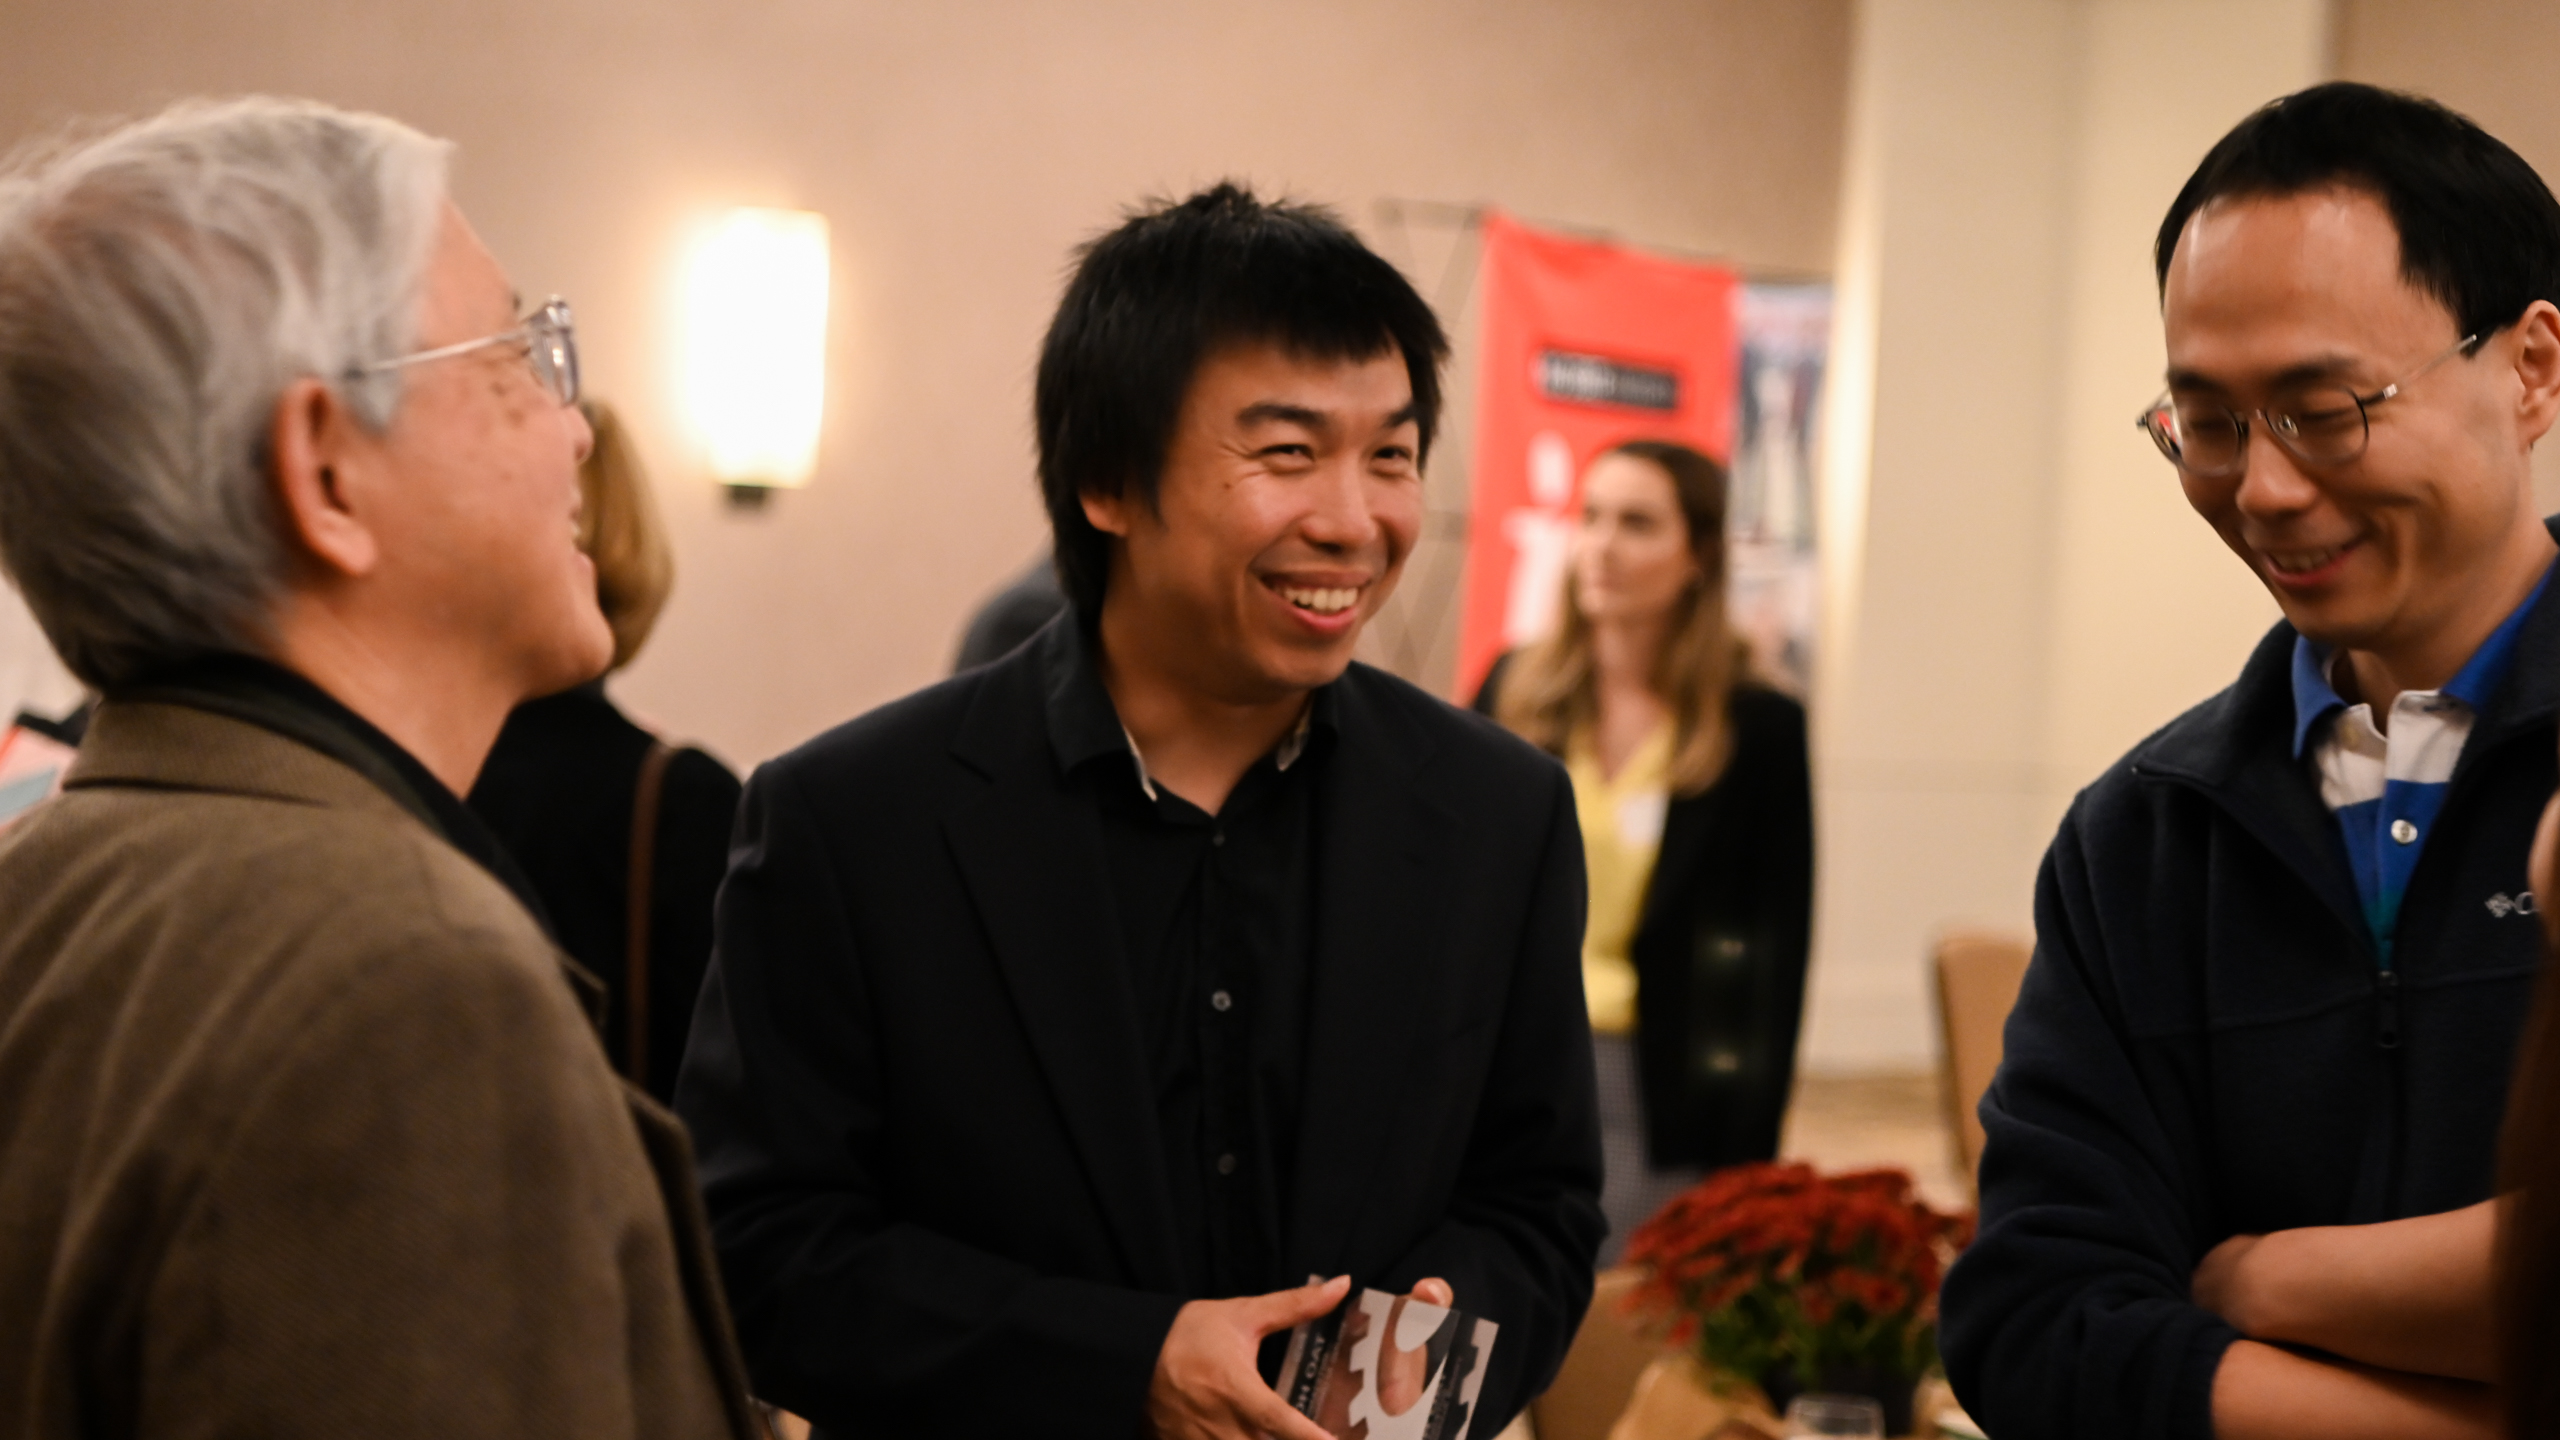 Dr. Tao Hong chatting with ISE faculty members after the Hall of Fame Breakfast